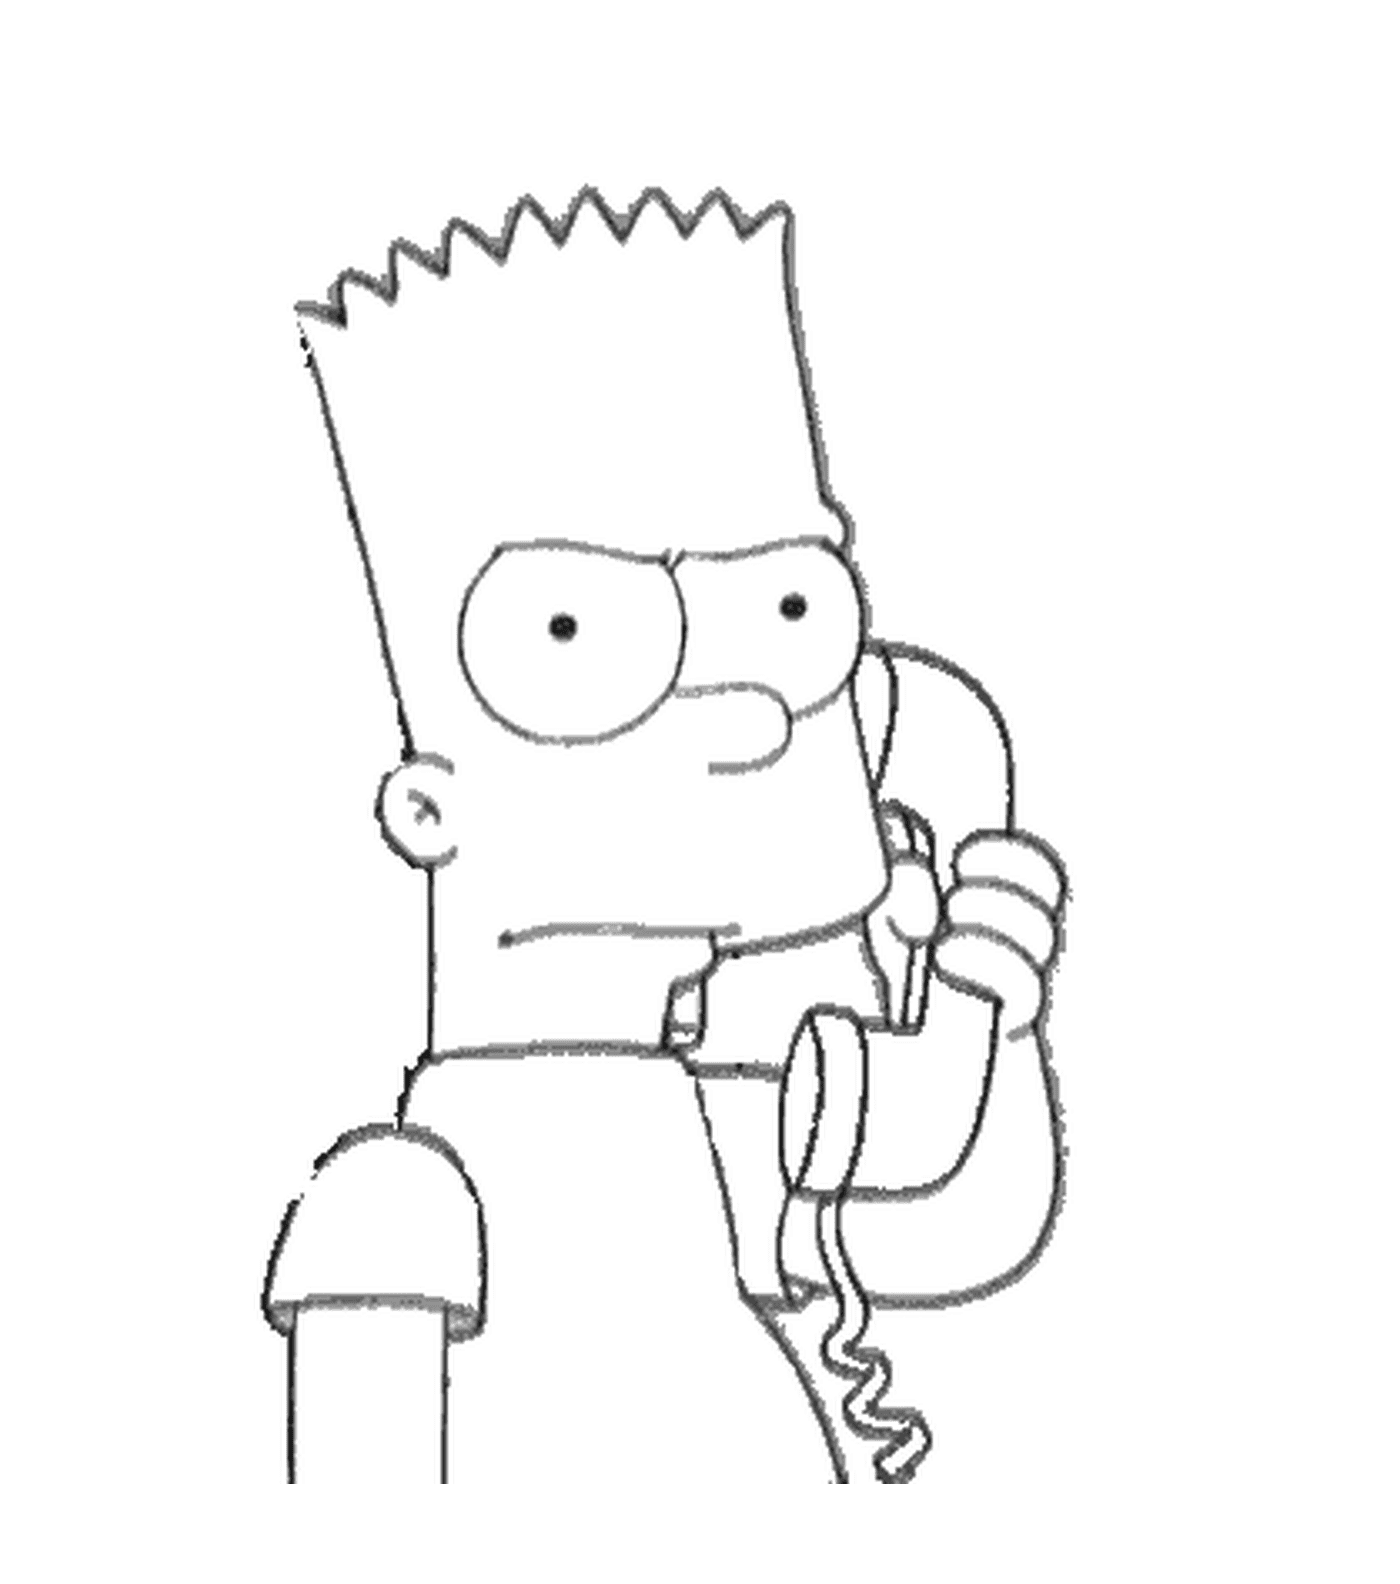  Bart's serious on the phone 